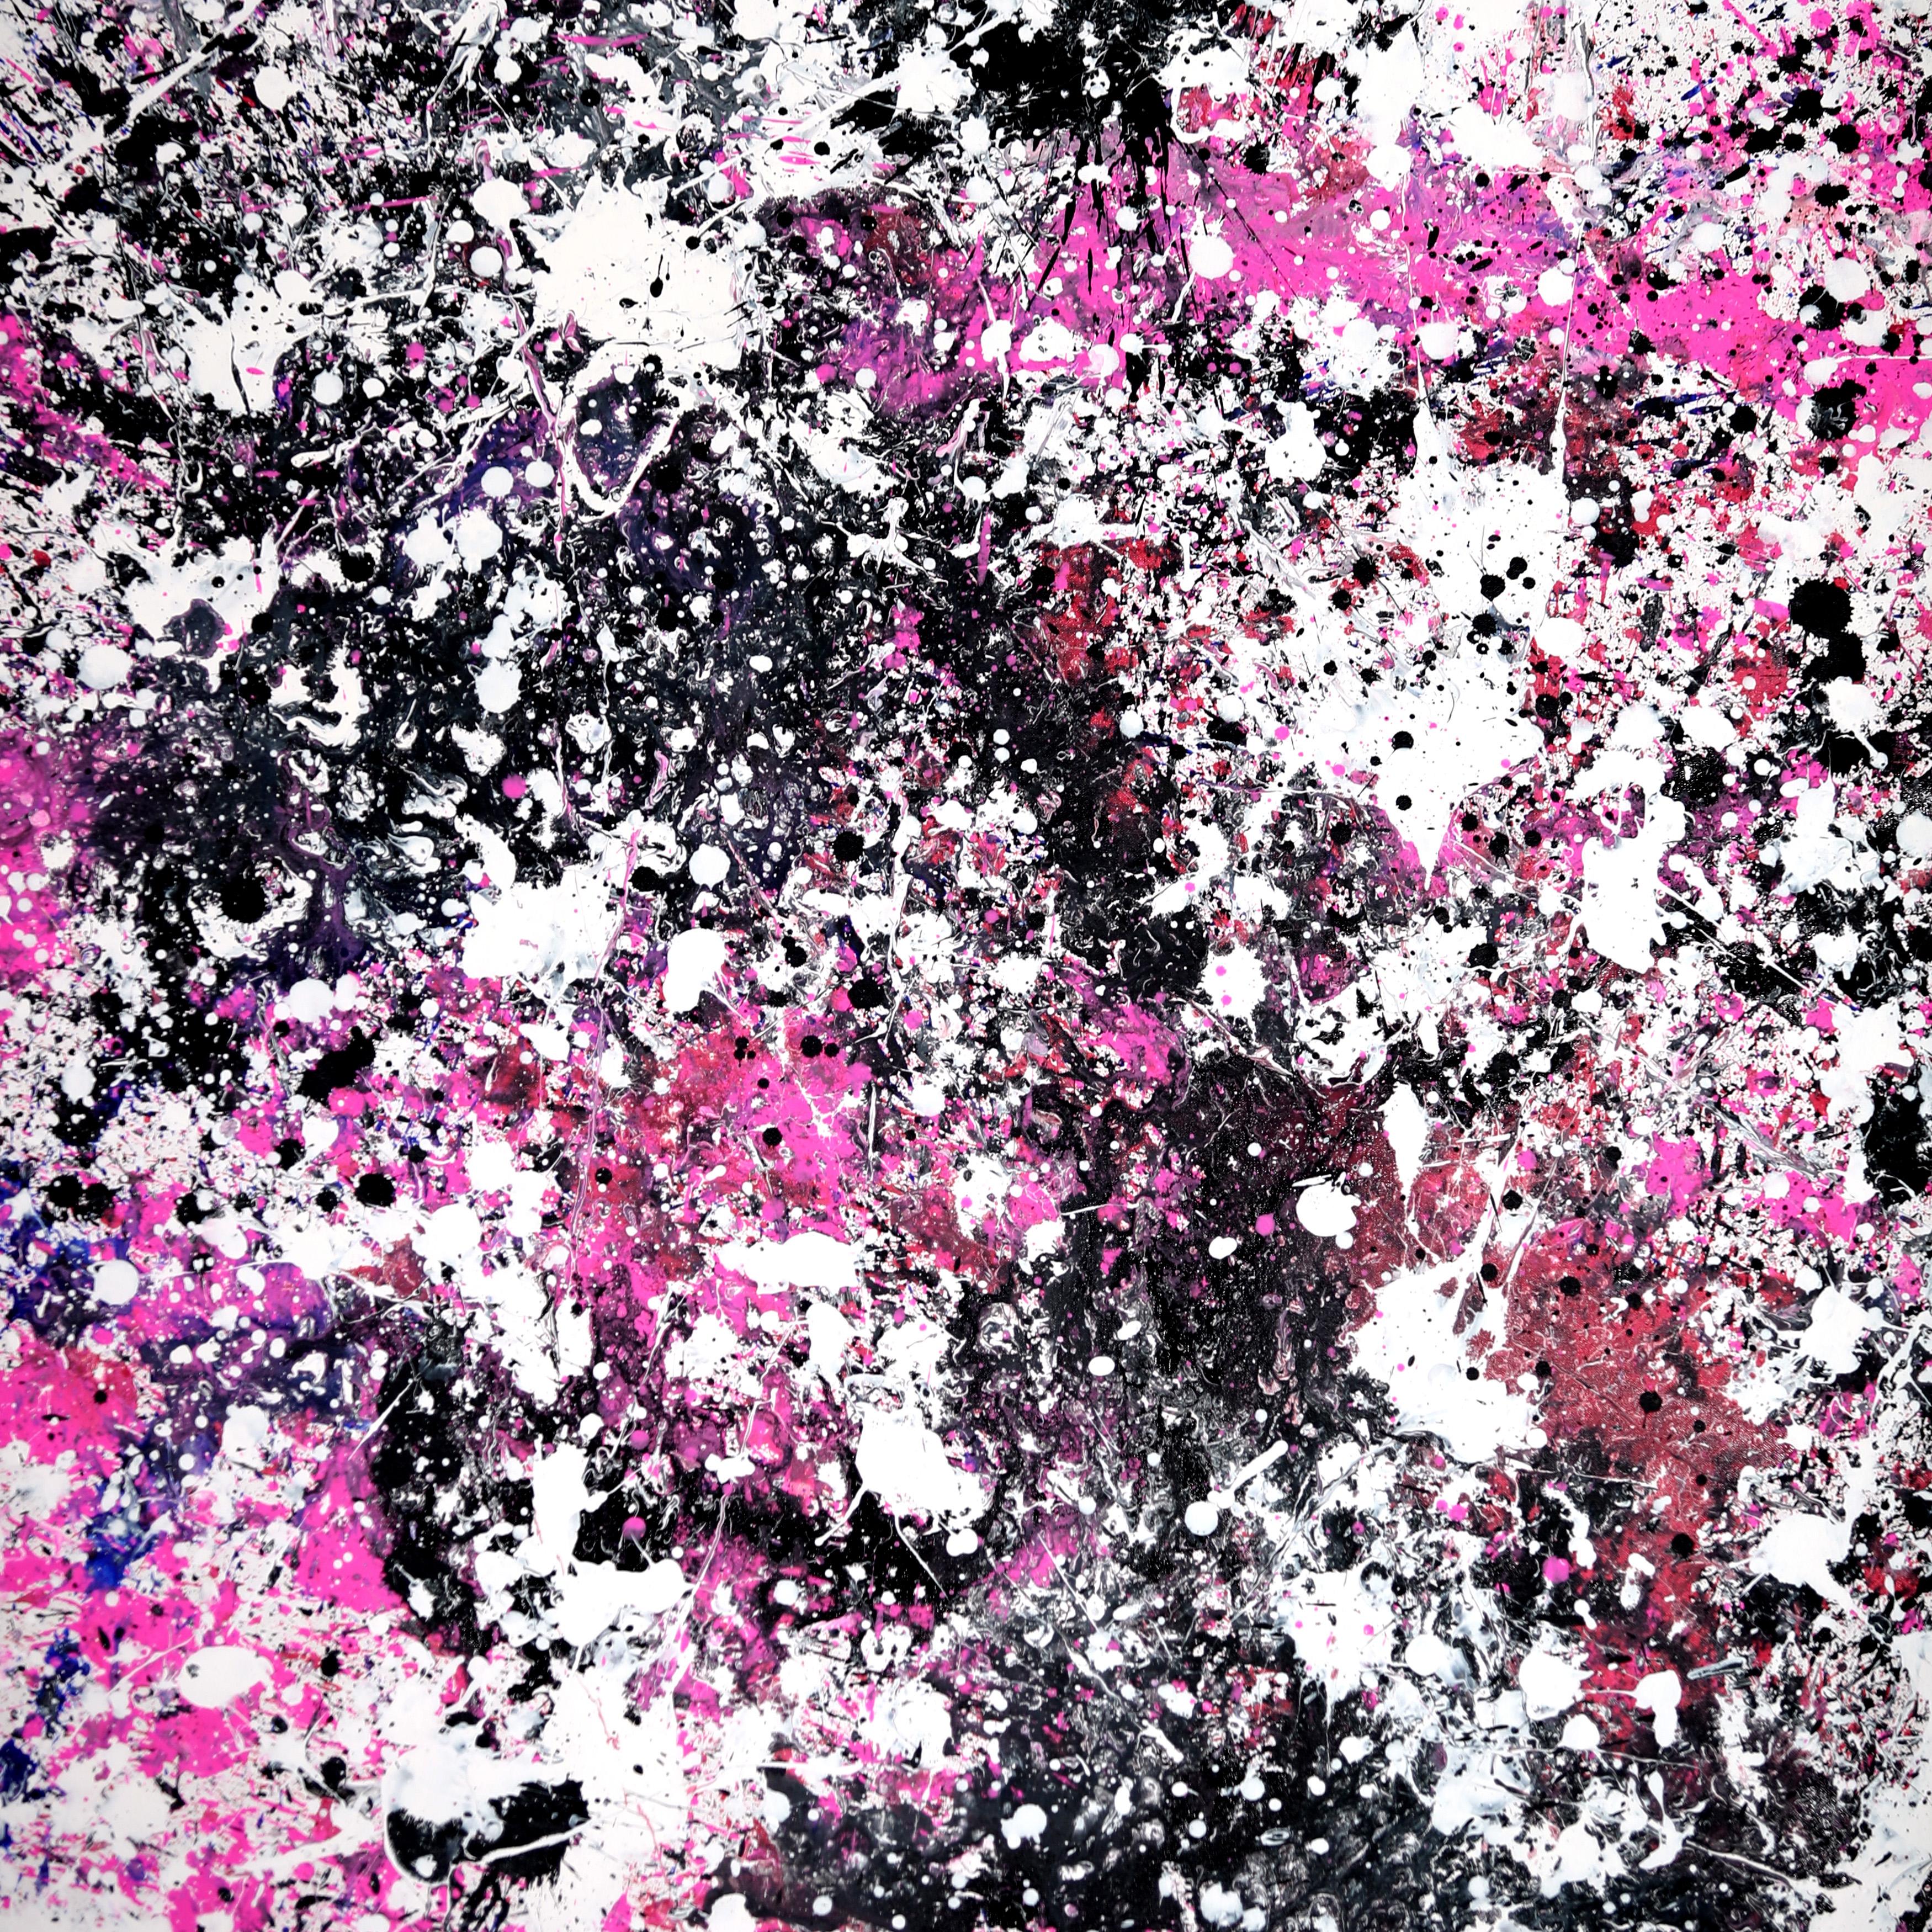 My Pink Universe - Painting by Estelle Asmodelle